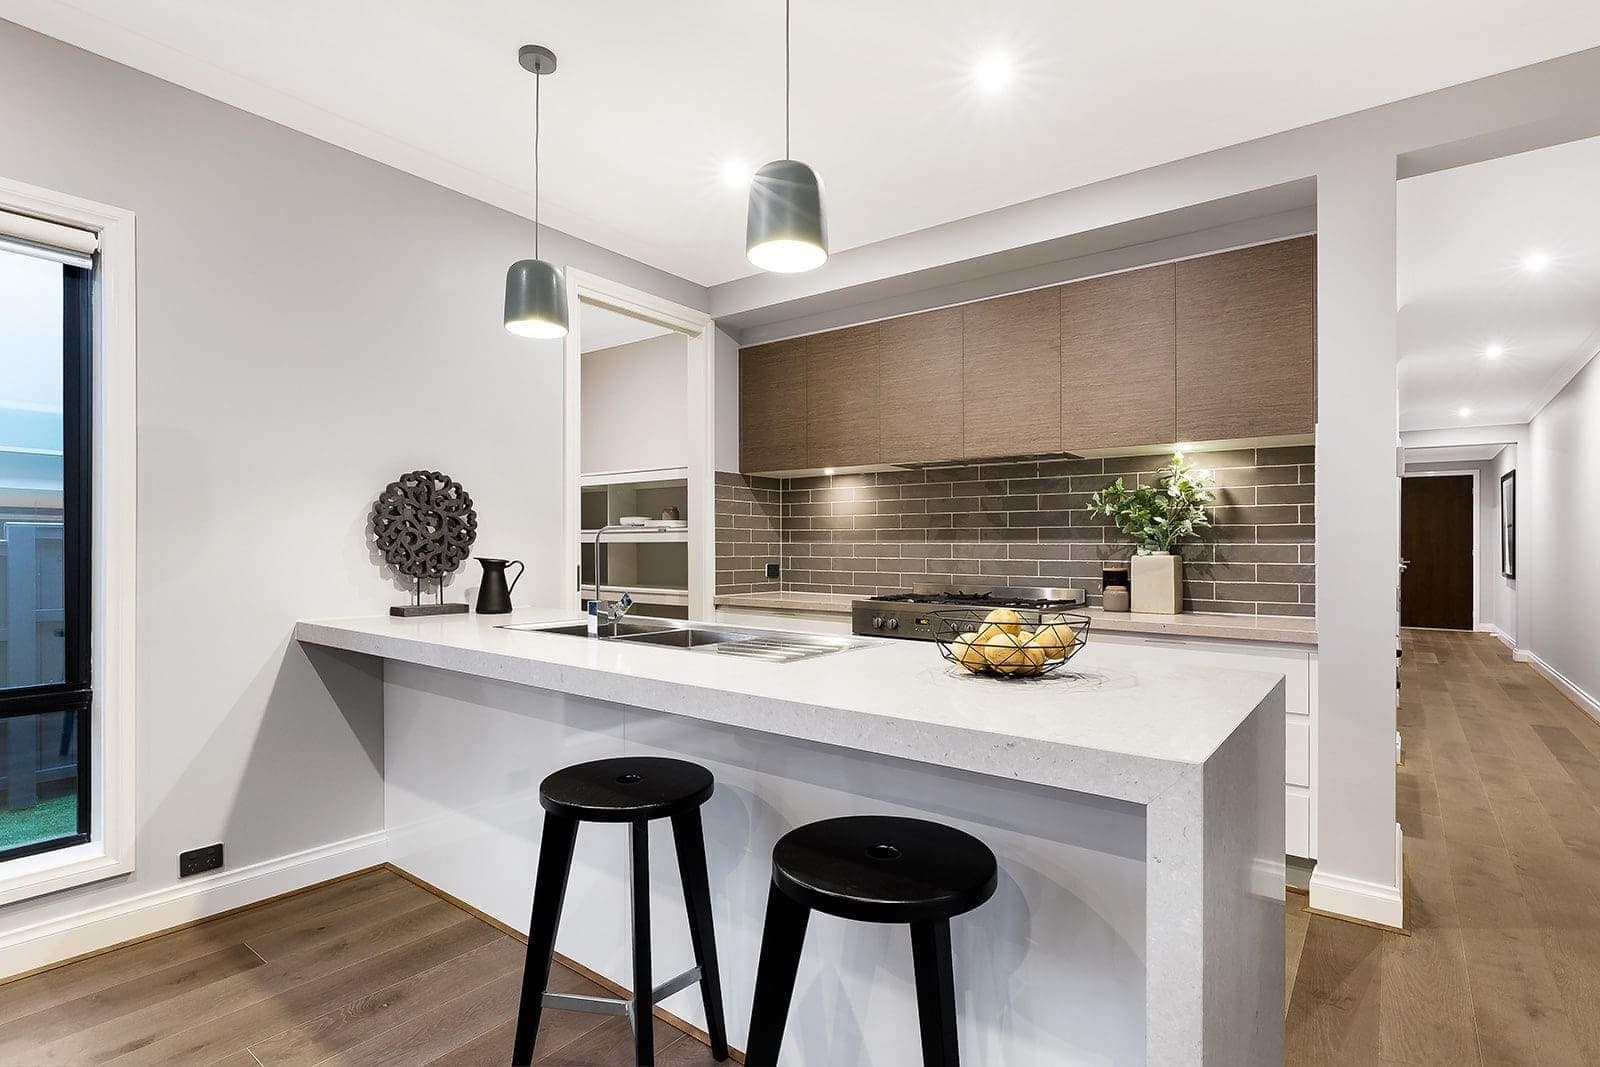 grey and white kitchen ideas by metricon grange 25 display home